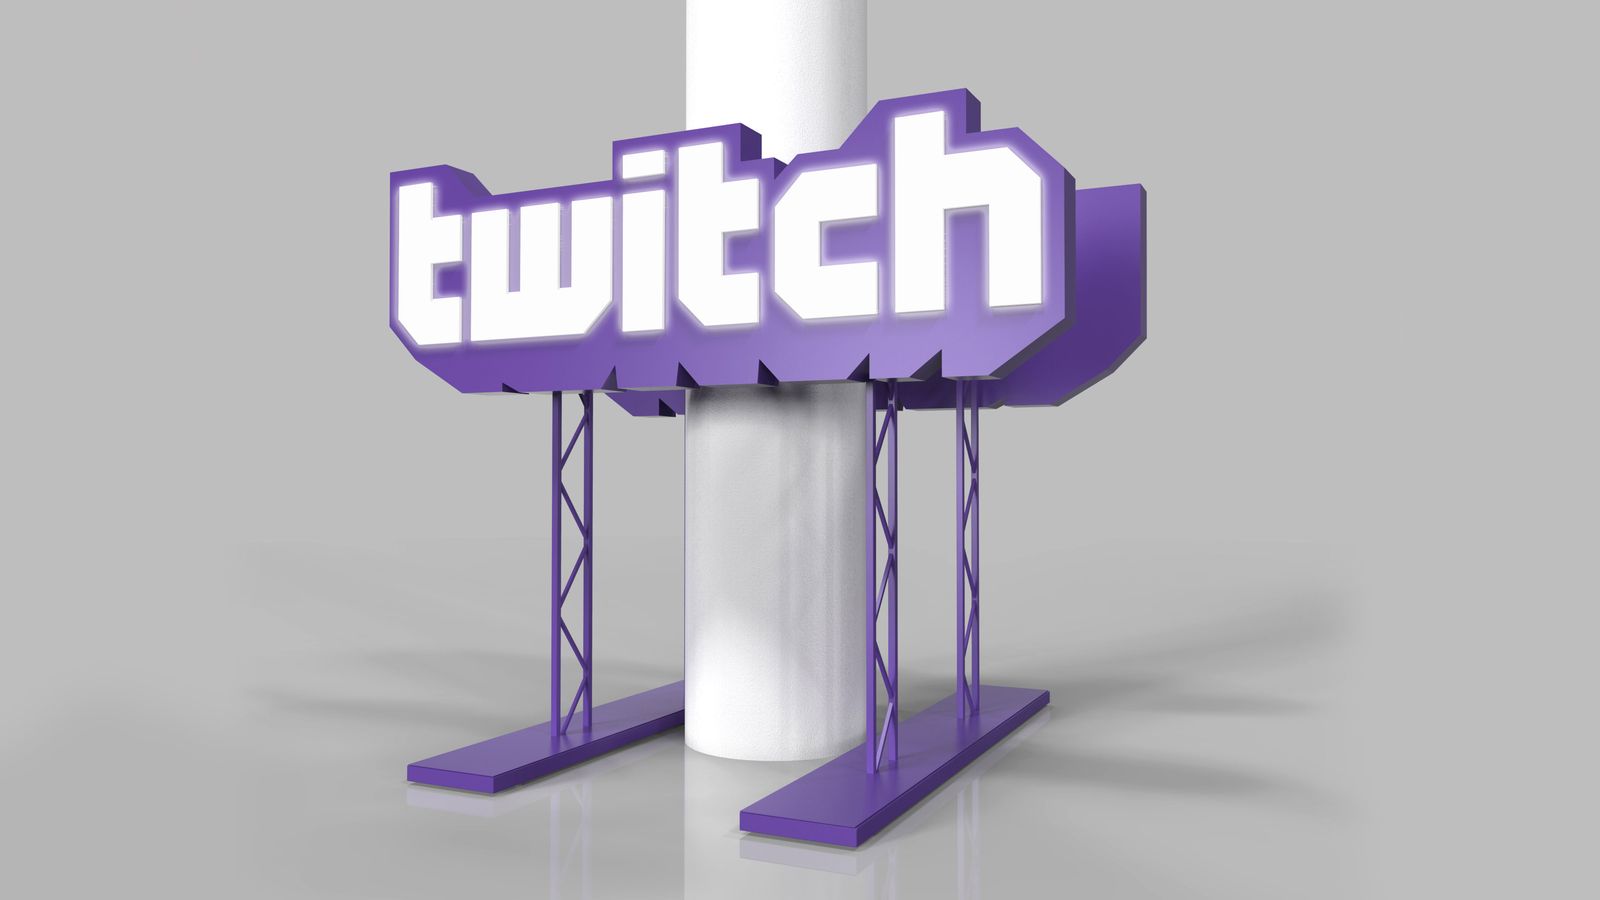 twitch stand 3d rendering